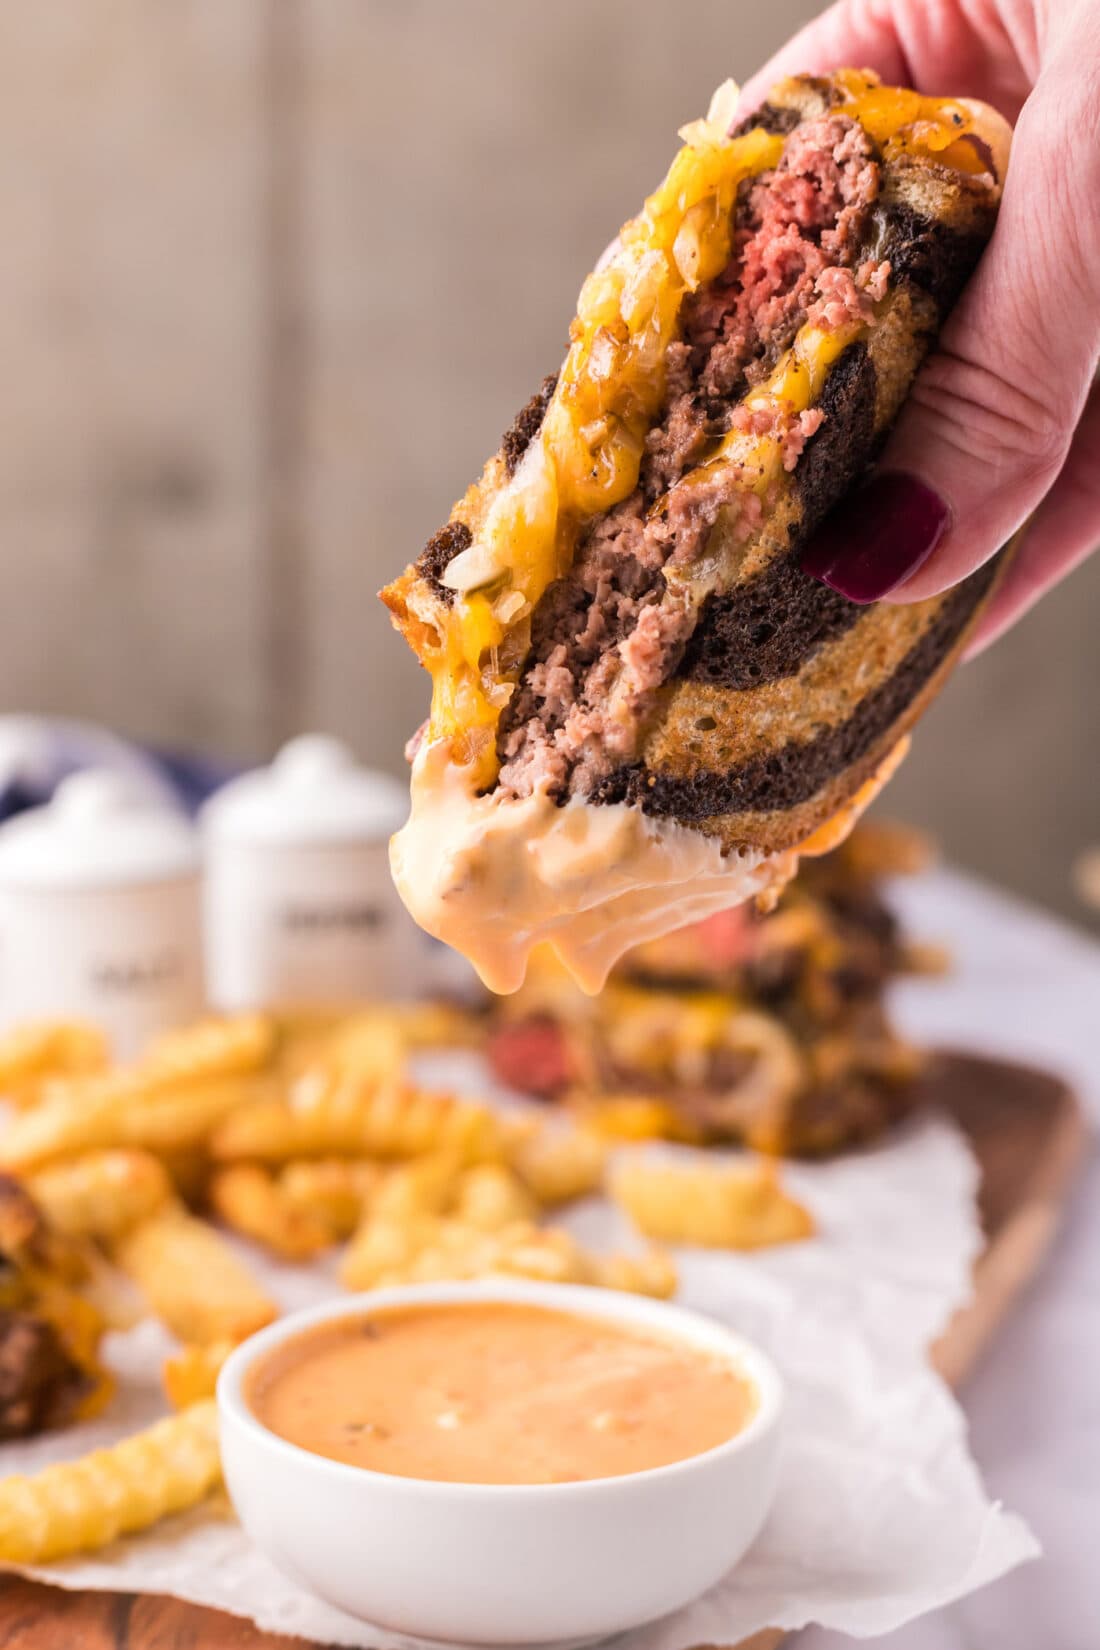 Patty Melt dipped in sauce